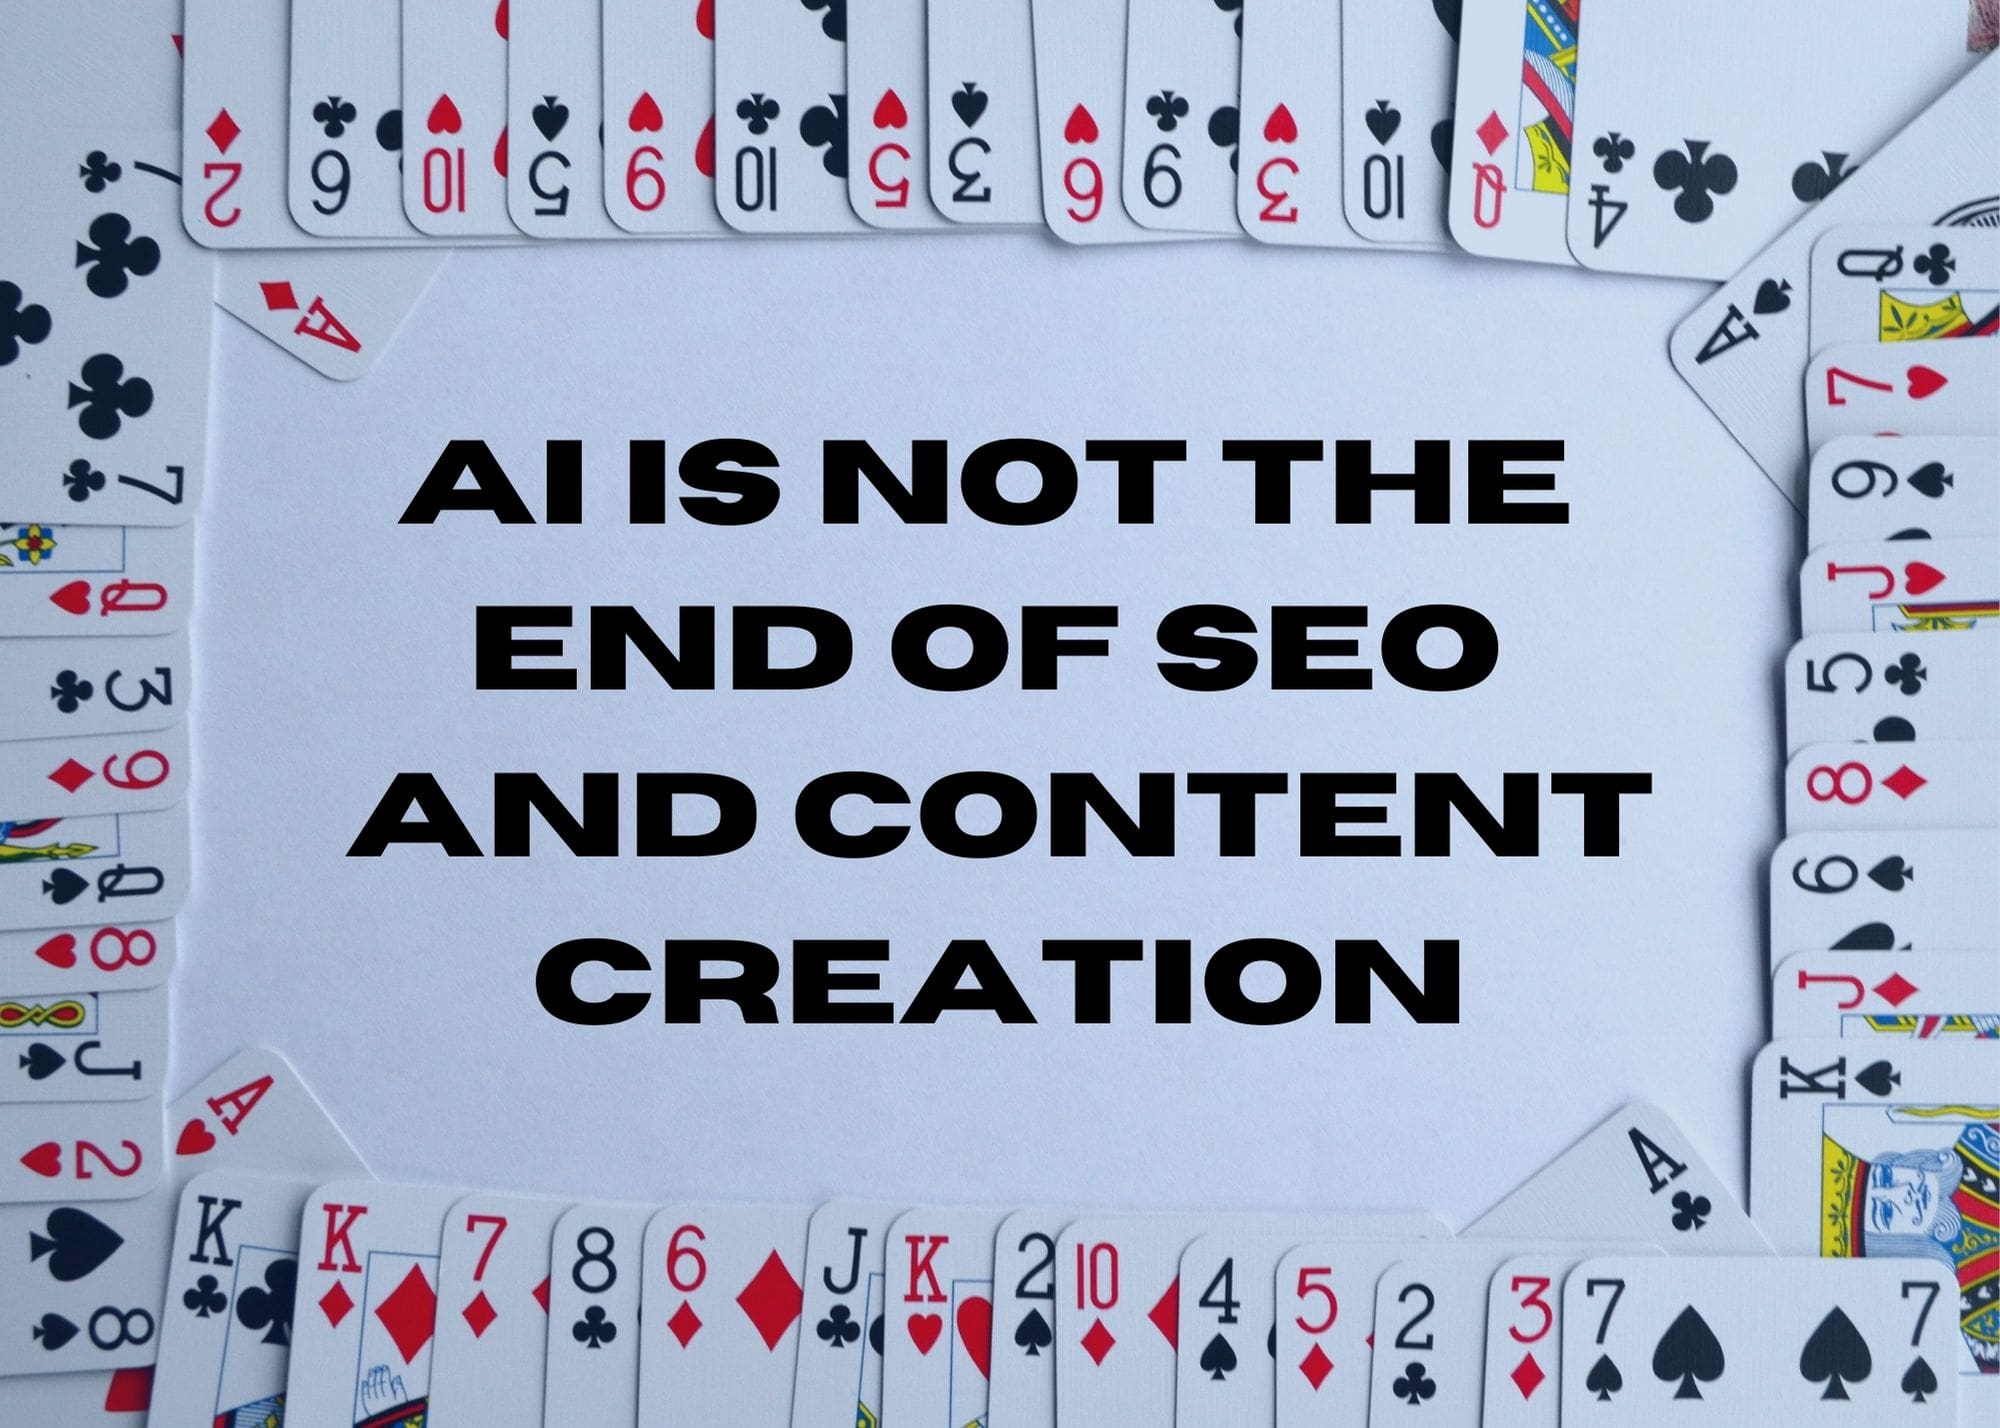 Image of a deck of cards as a frame for an article about AI not being the end of SEO and content creation.